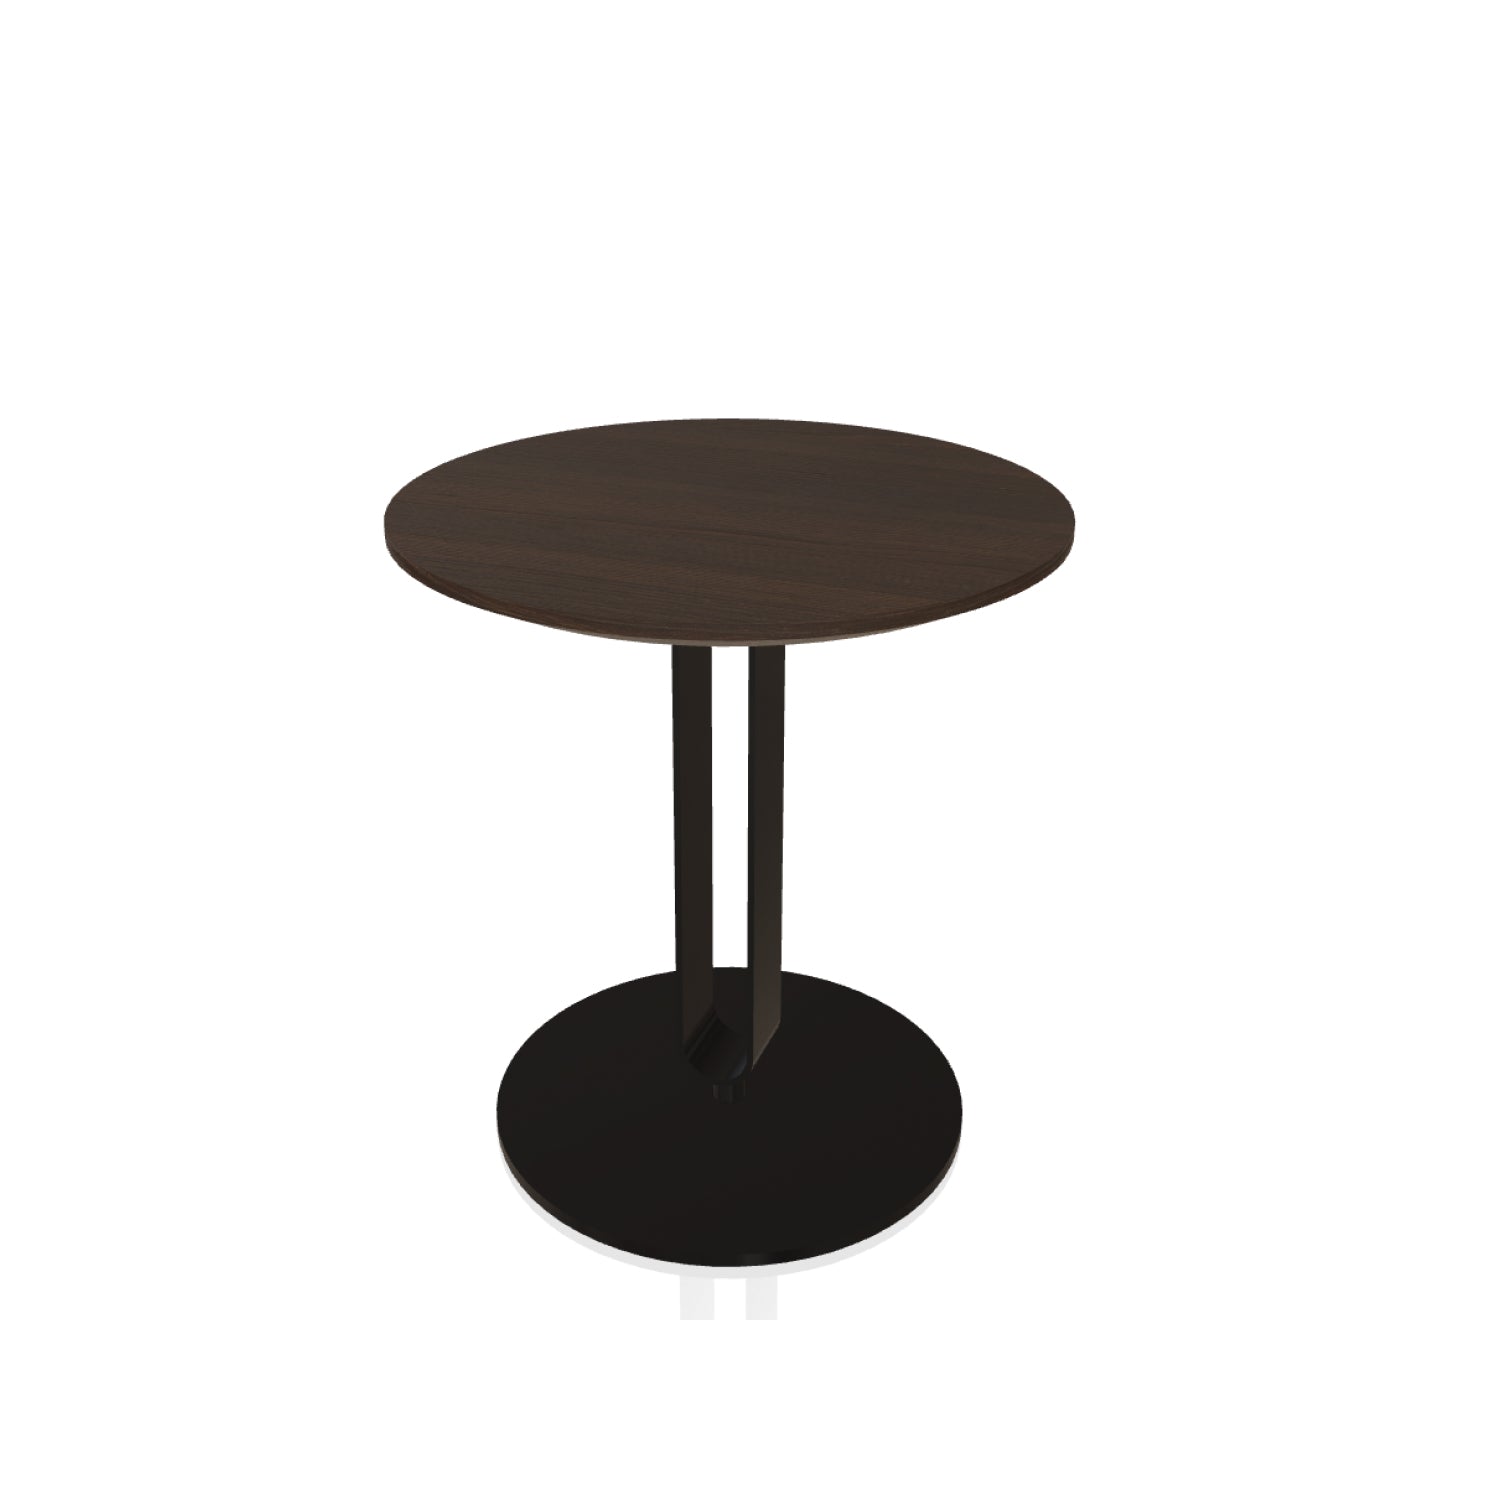 Alfred Coffee Table By Bontempi Casa - Spessart oak With Black Base